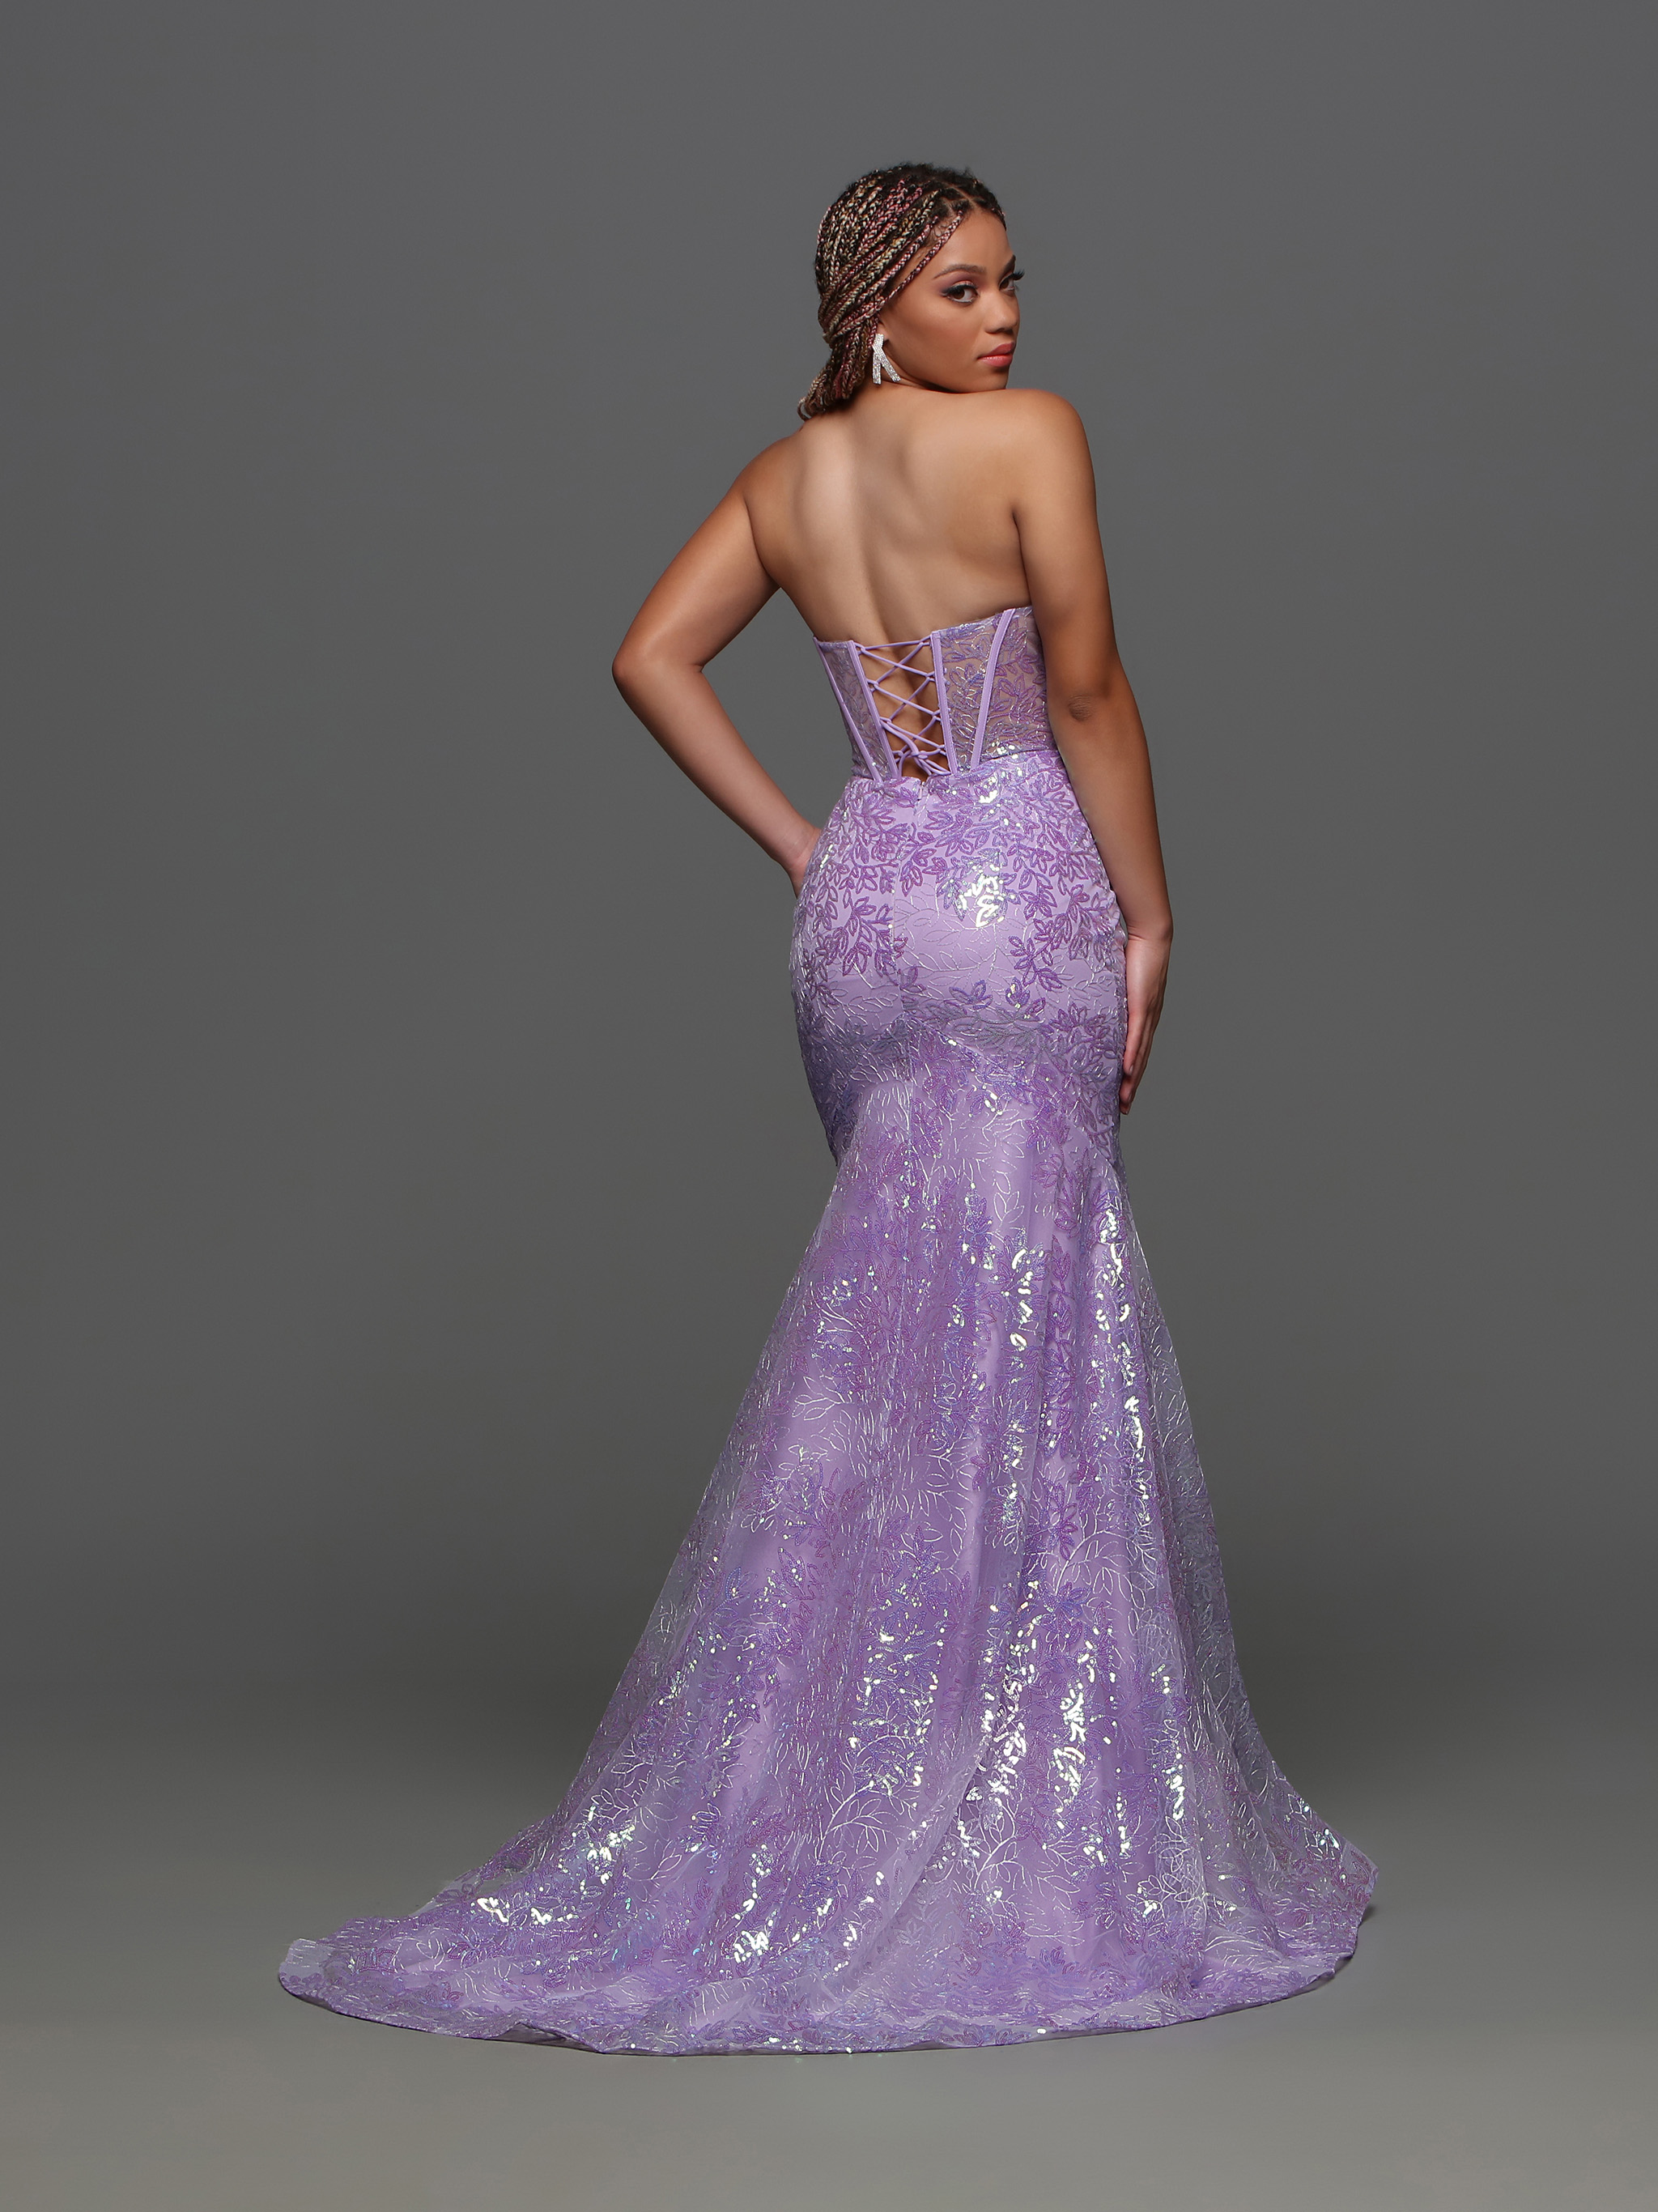 Image showing back view of style #72362